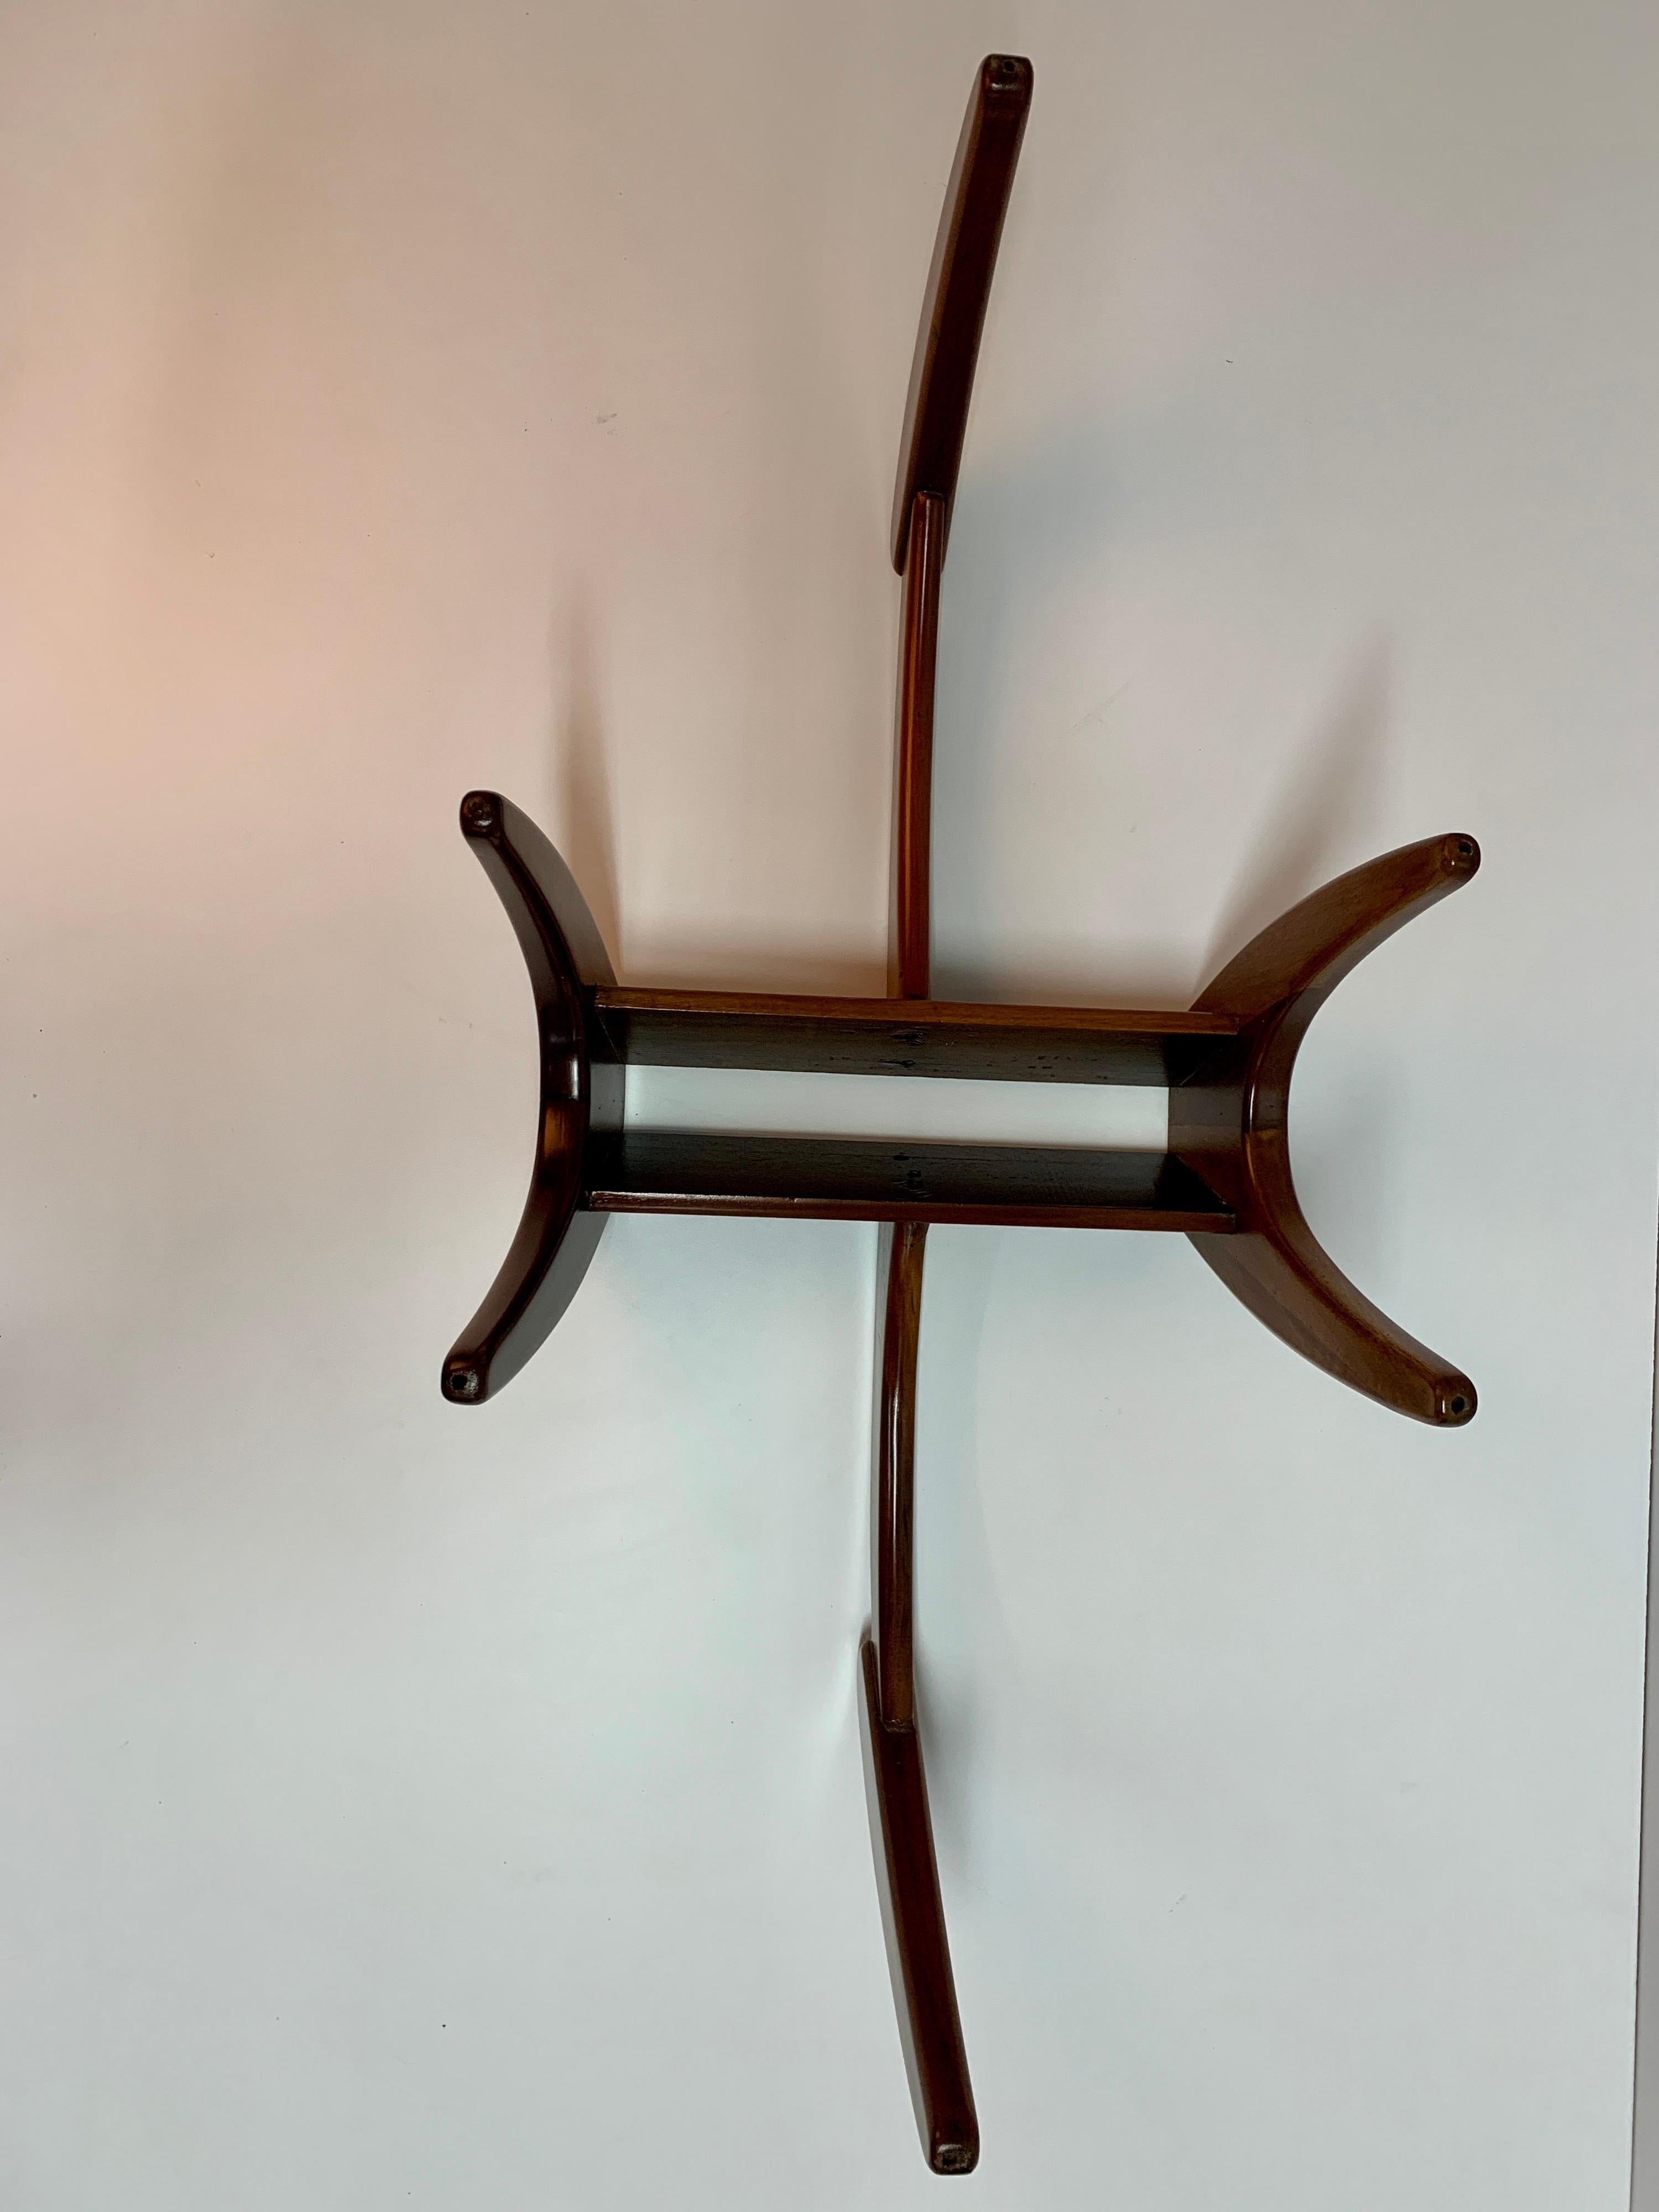 Walnut Mid-Century Modern Coffee Table Attributed to Kroehler or Tonk